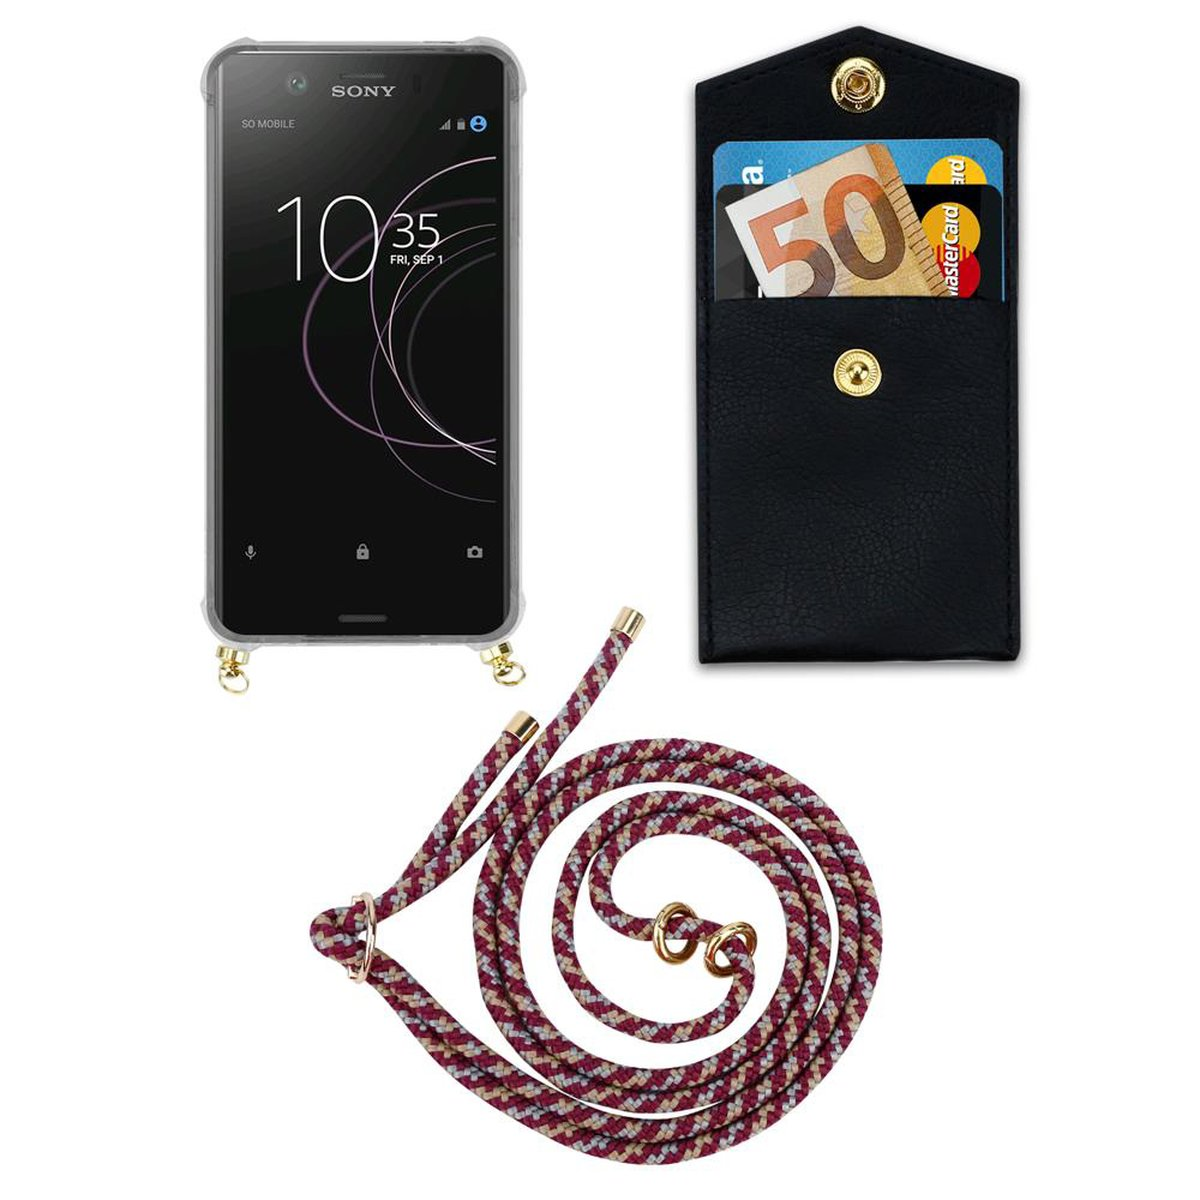 Handy abnehmbarer Band Gold Kette Xperia Kordel XZ1, Hülle, Backcover, GELB und Ringen, mit CADORABO Sony, WEIß ROT